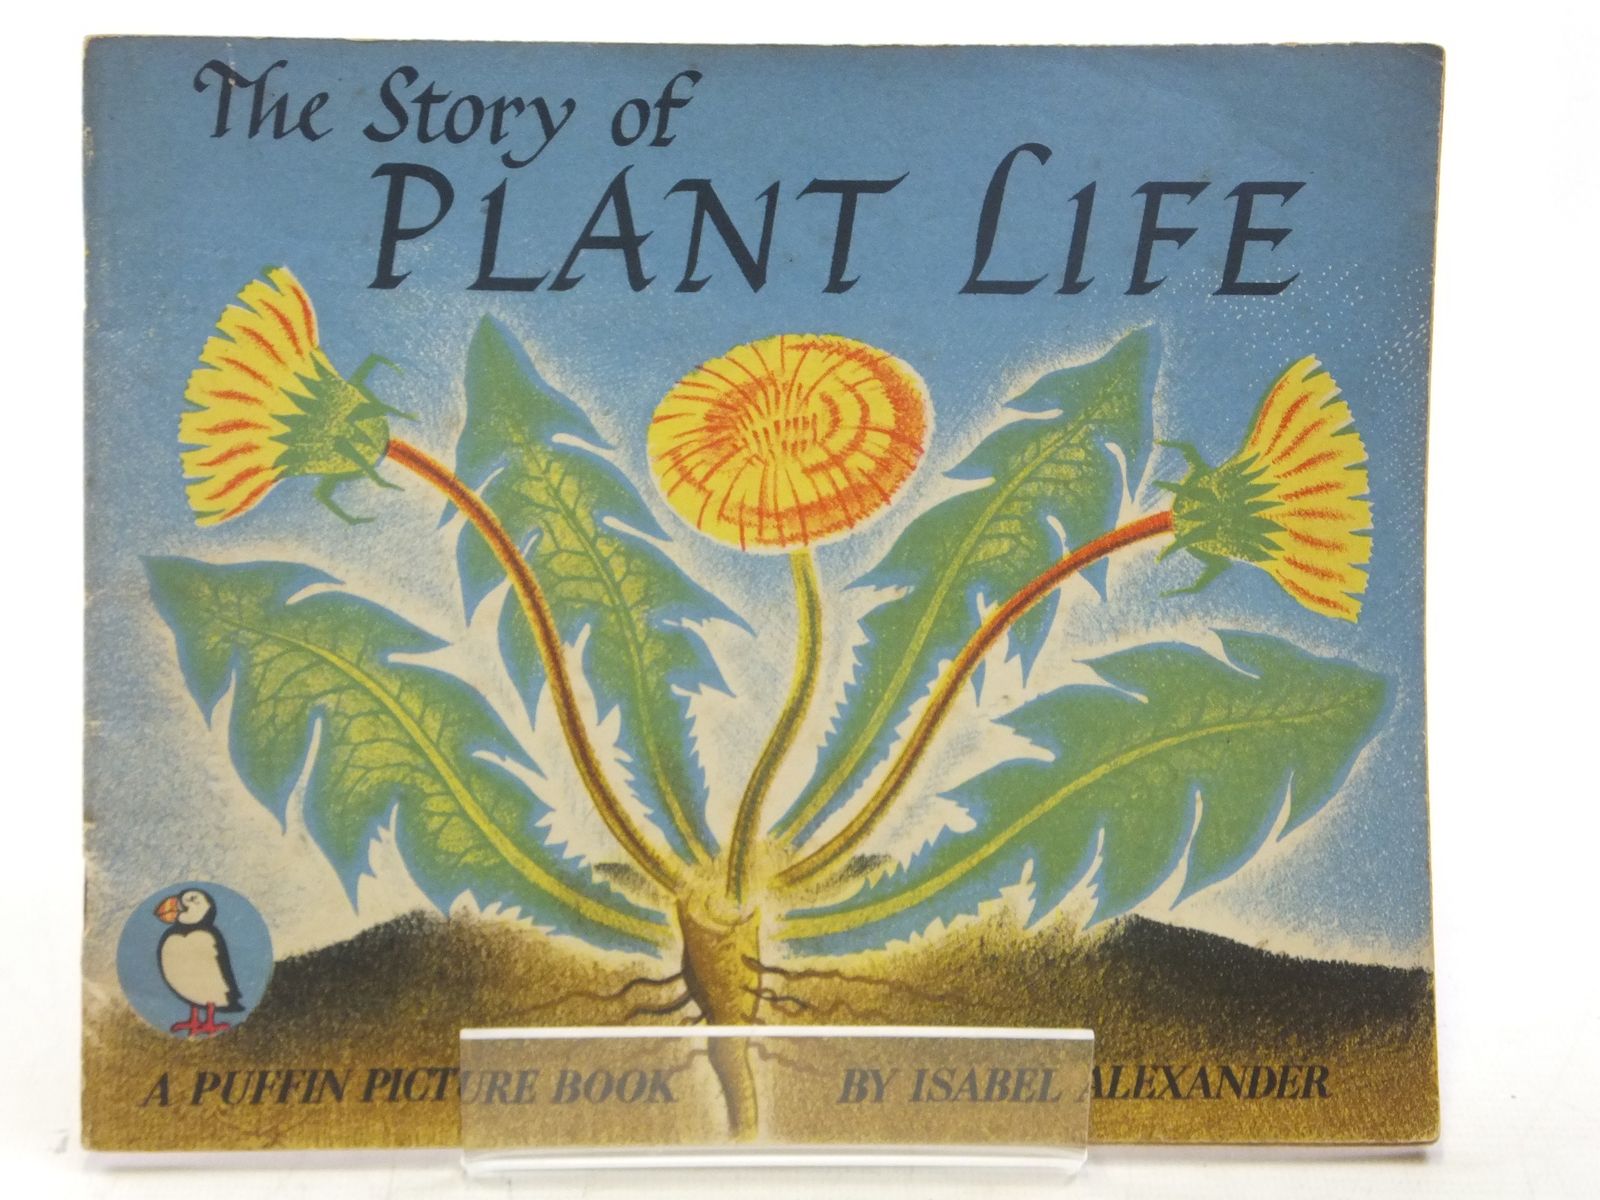 Plants story. Puffin books. The Secret Life of Plants. [1979] Journey through the Secret Life of Plants. Flower stories.